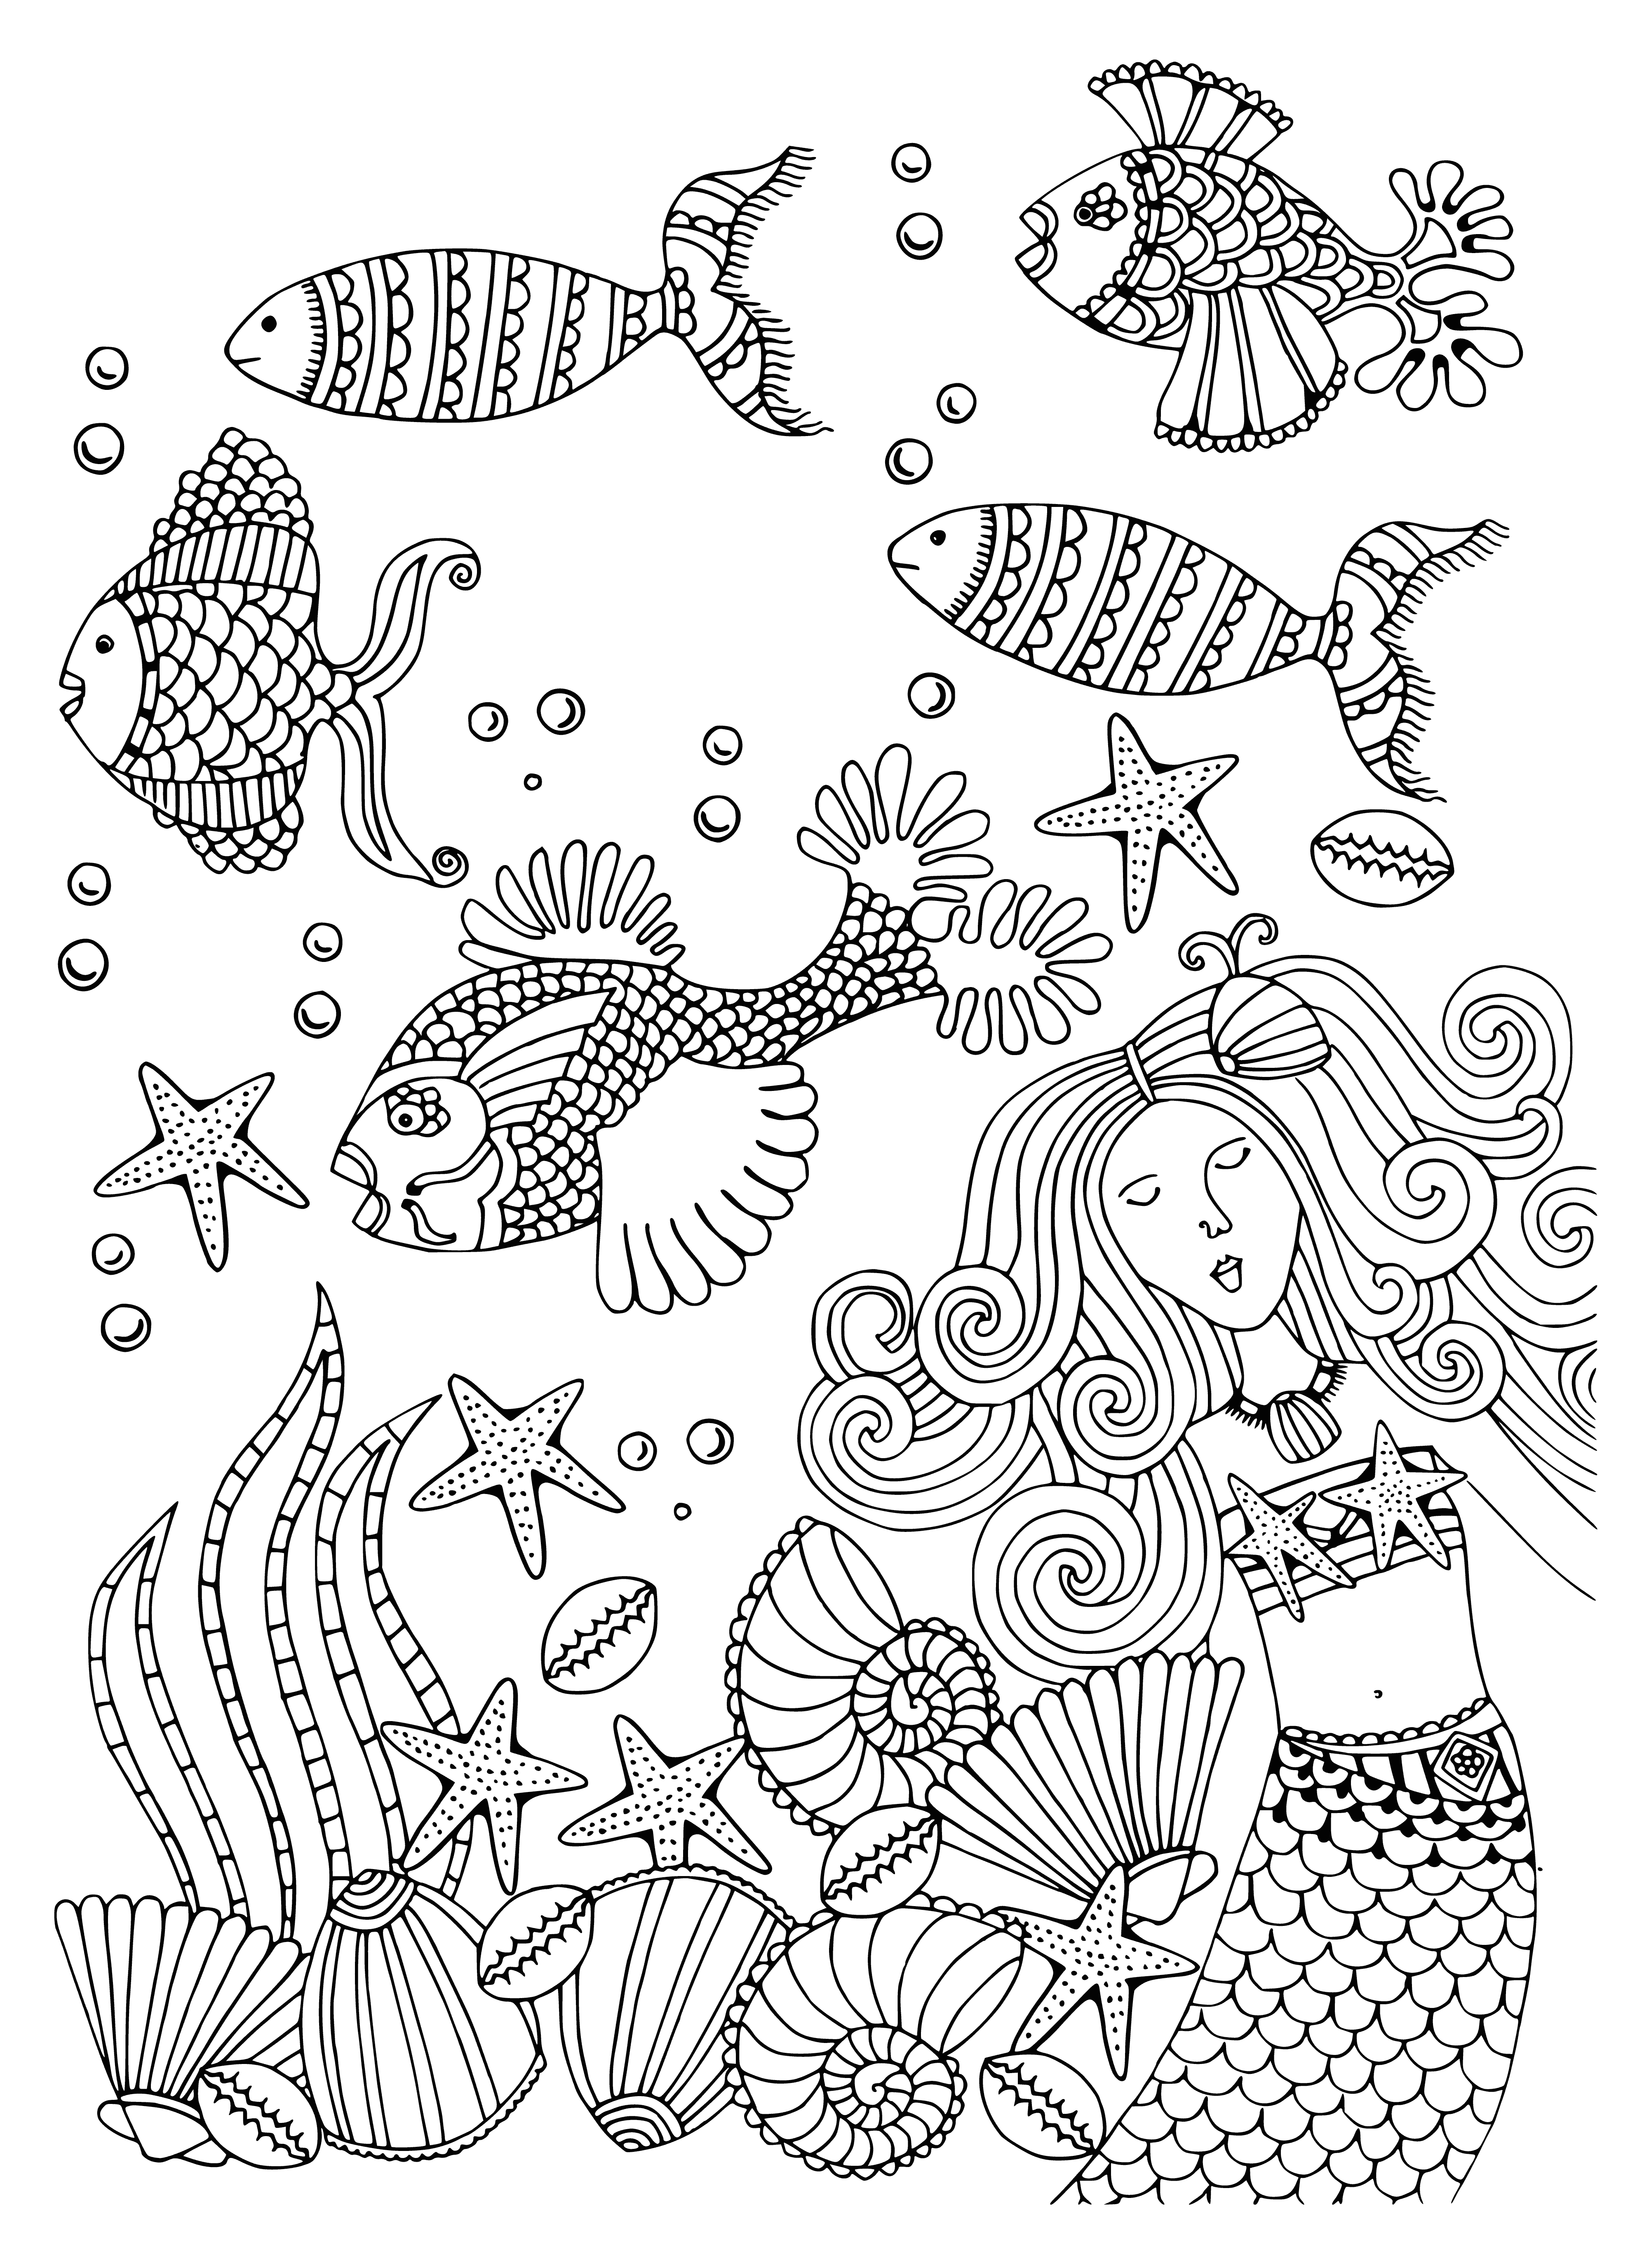 coloring page: A beautiful mermaid with yellow hair and a green tail, wearing a purple bikini and a purple crown with green jewels, surrounded by orange and blue fishes.